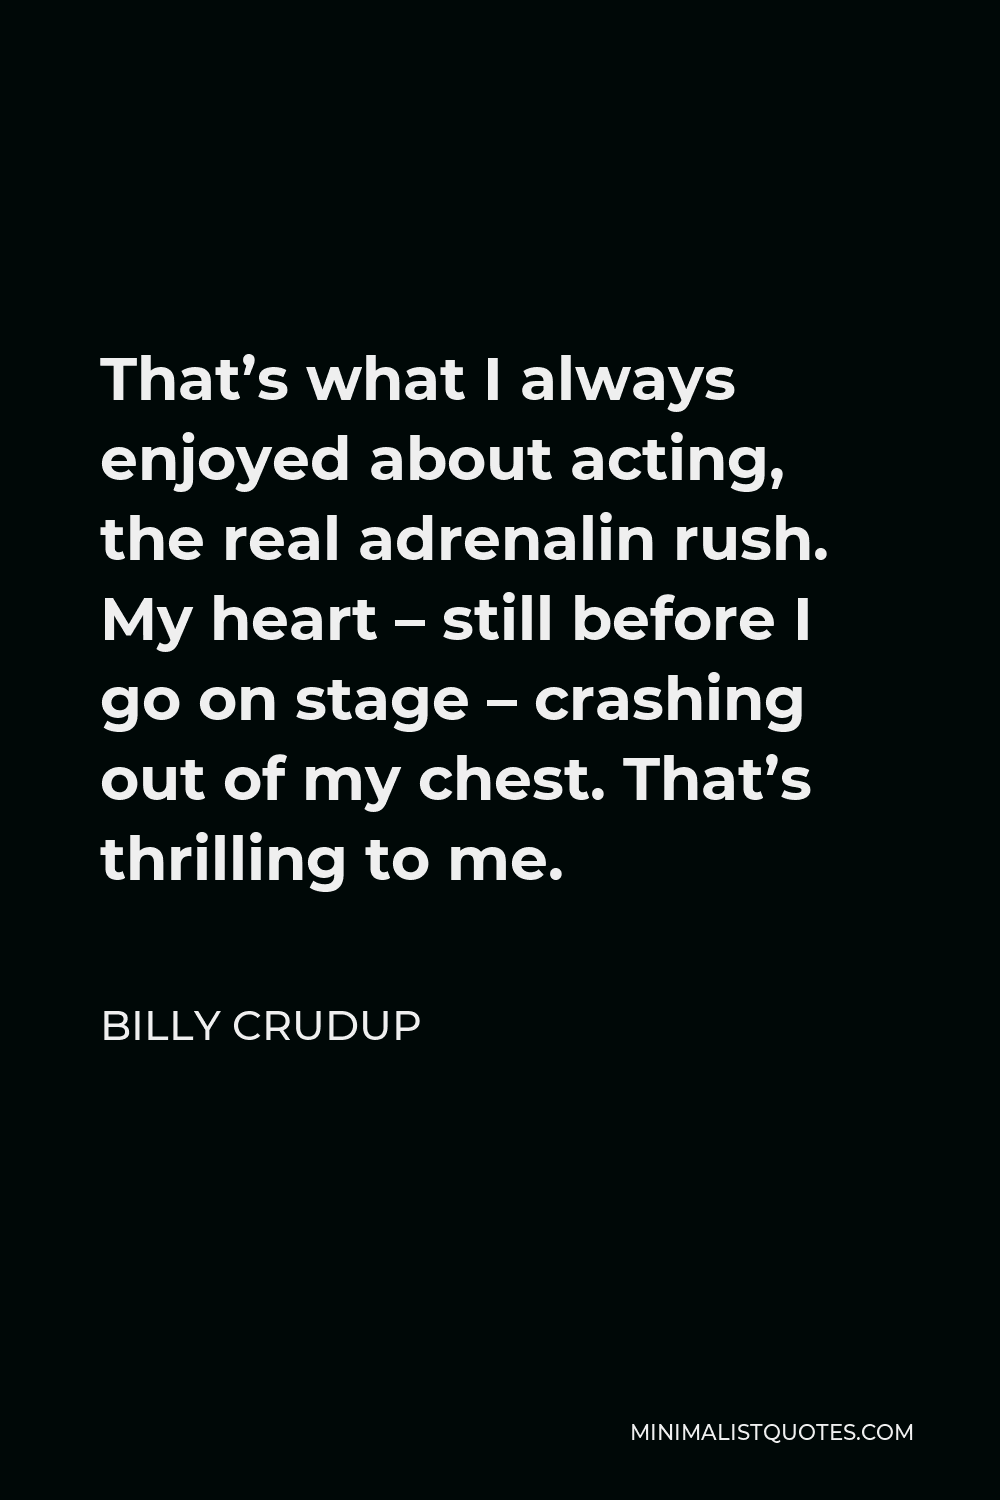 Billy Crudup Quote - That’s what I always enjoyed about acting, the real adrenalin rush. My heart – still before I go on stage – crashing out of my chest. That’s thrilling to me.